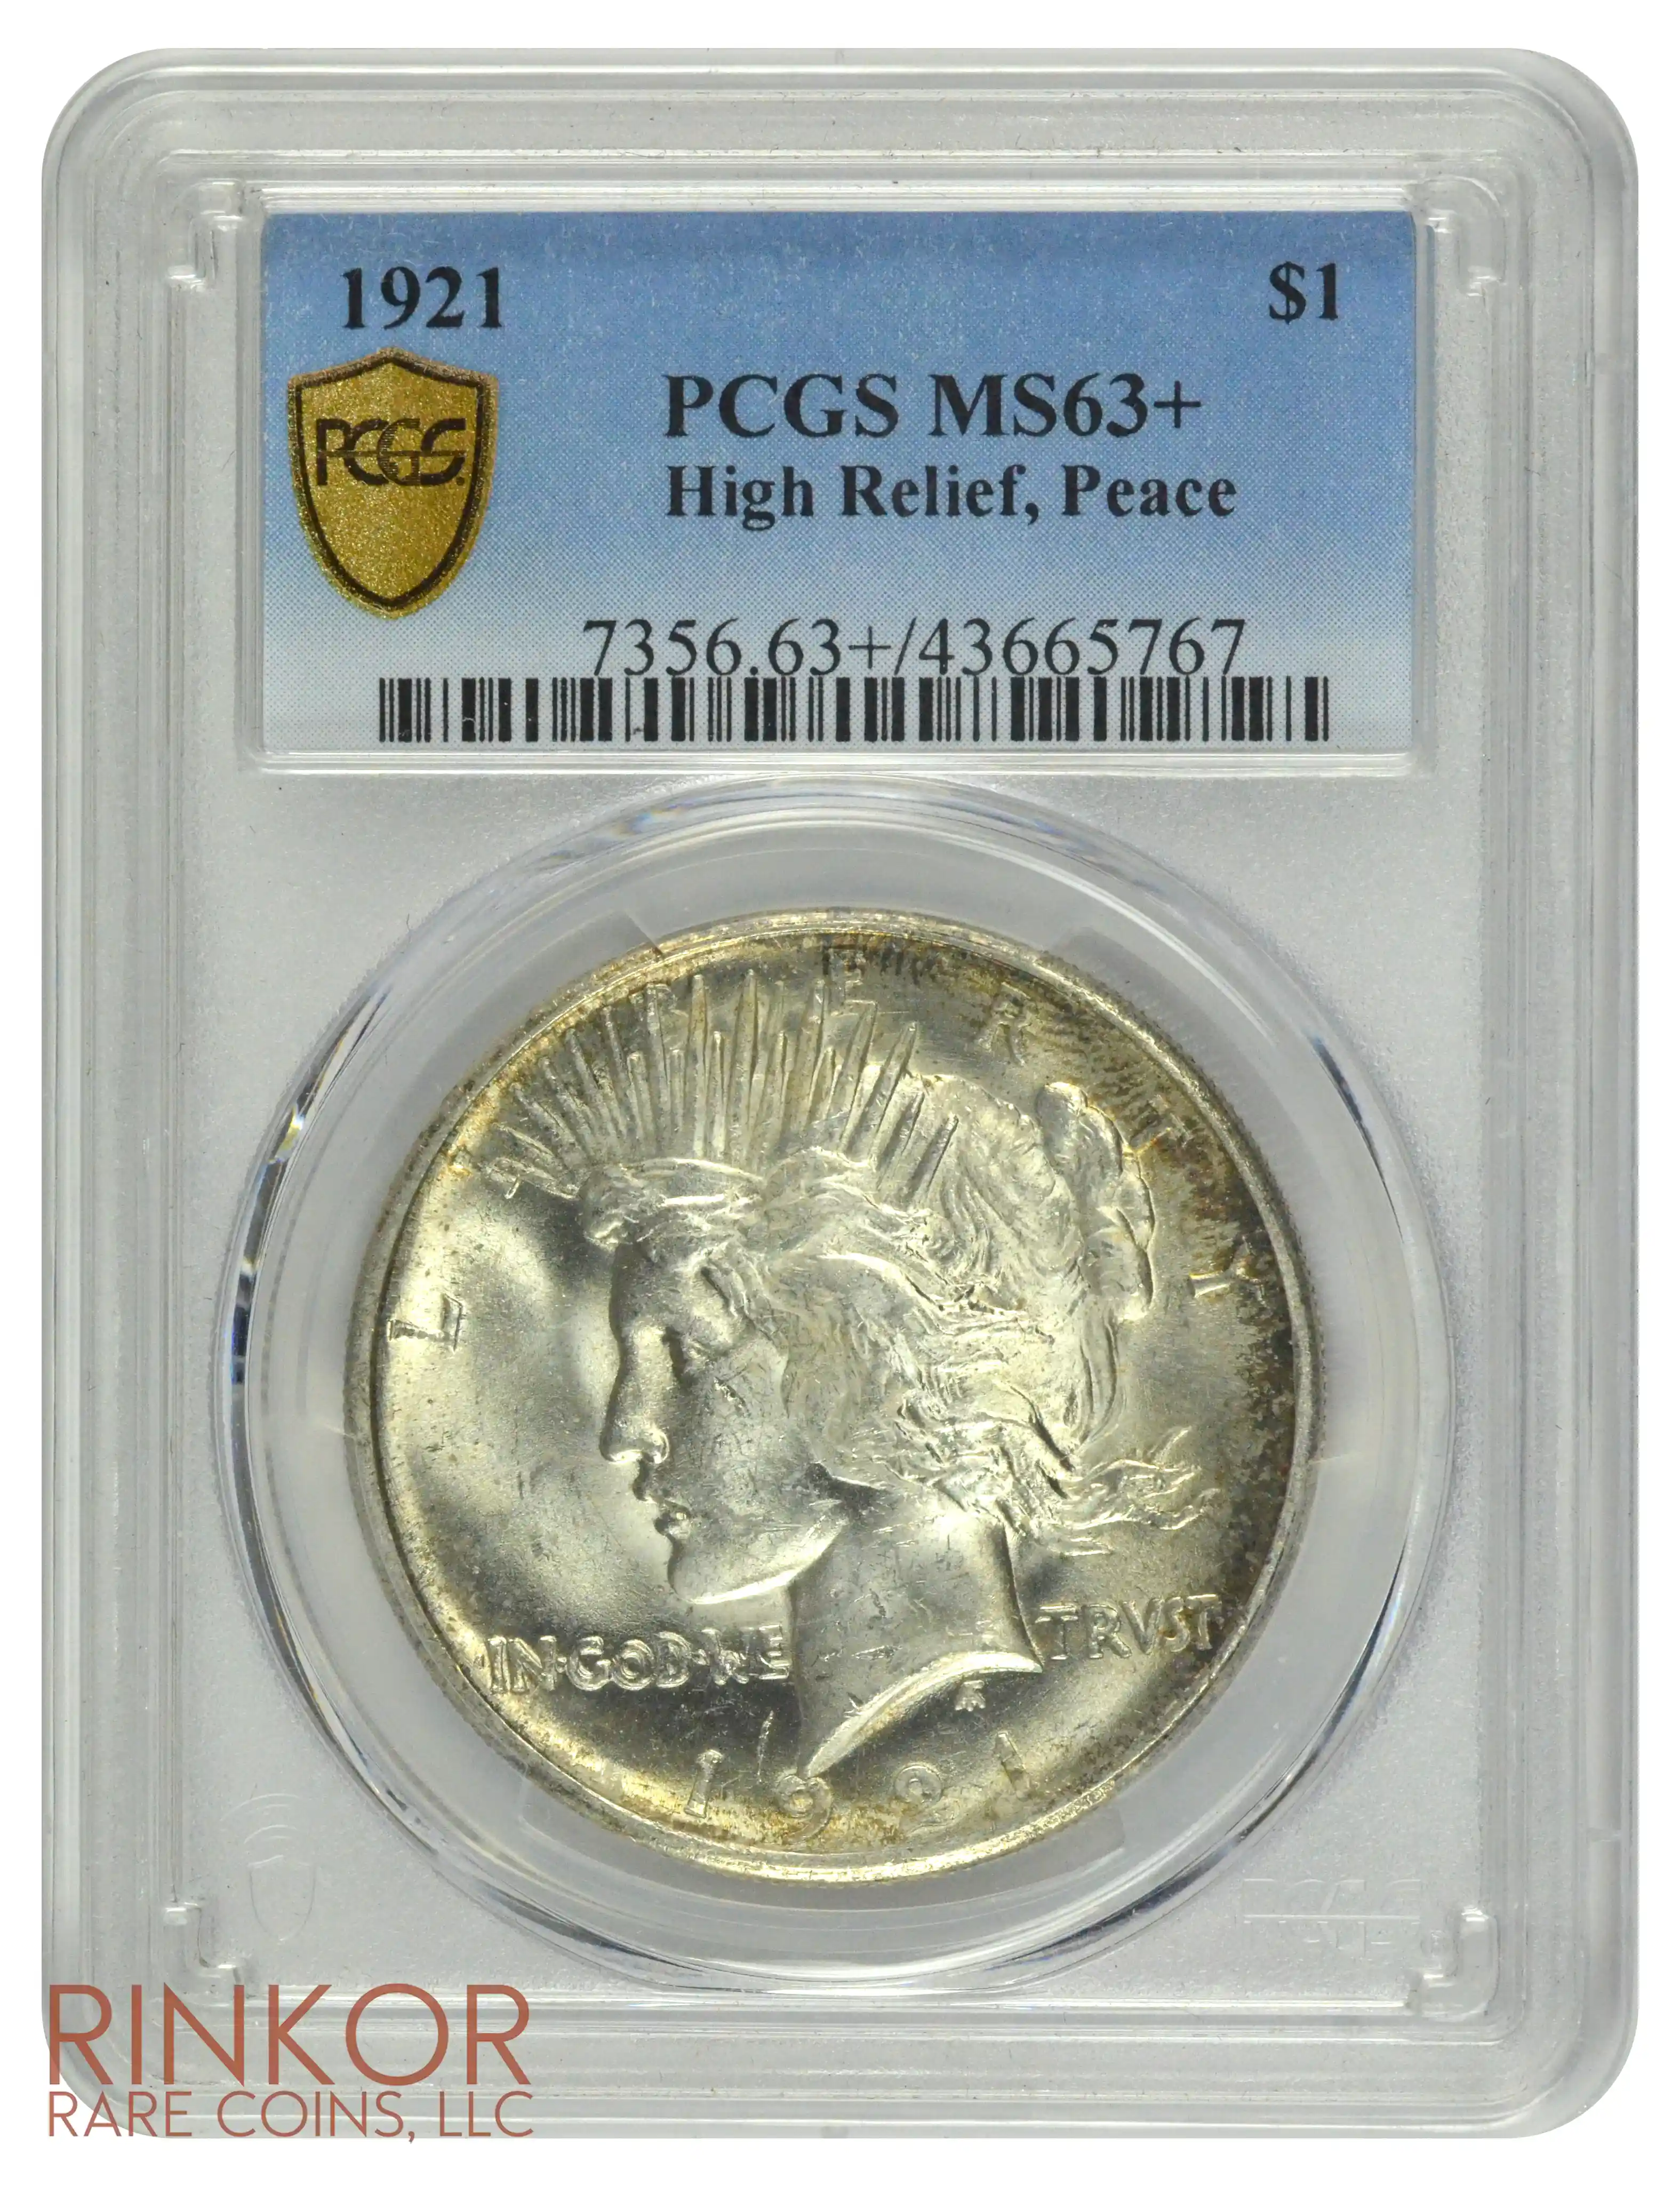 1921 $1 High Relief Peace PCGS MS 63+